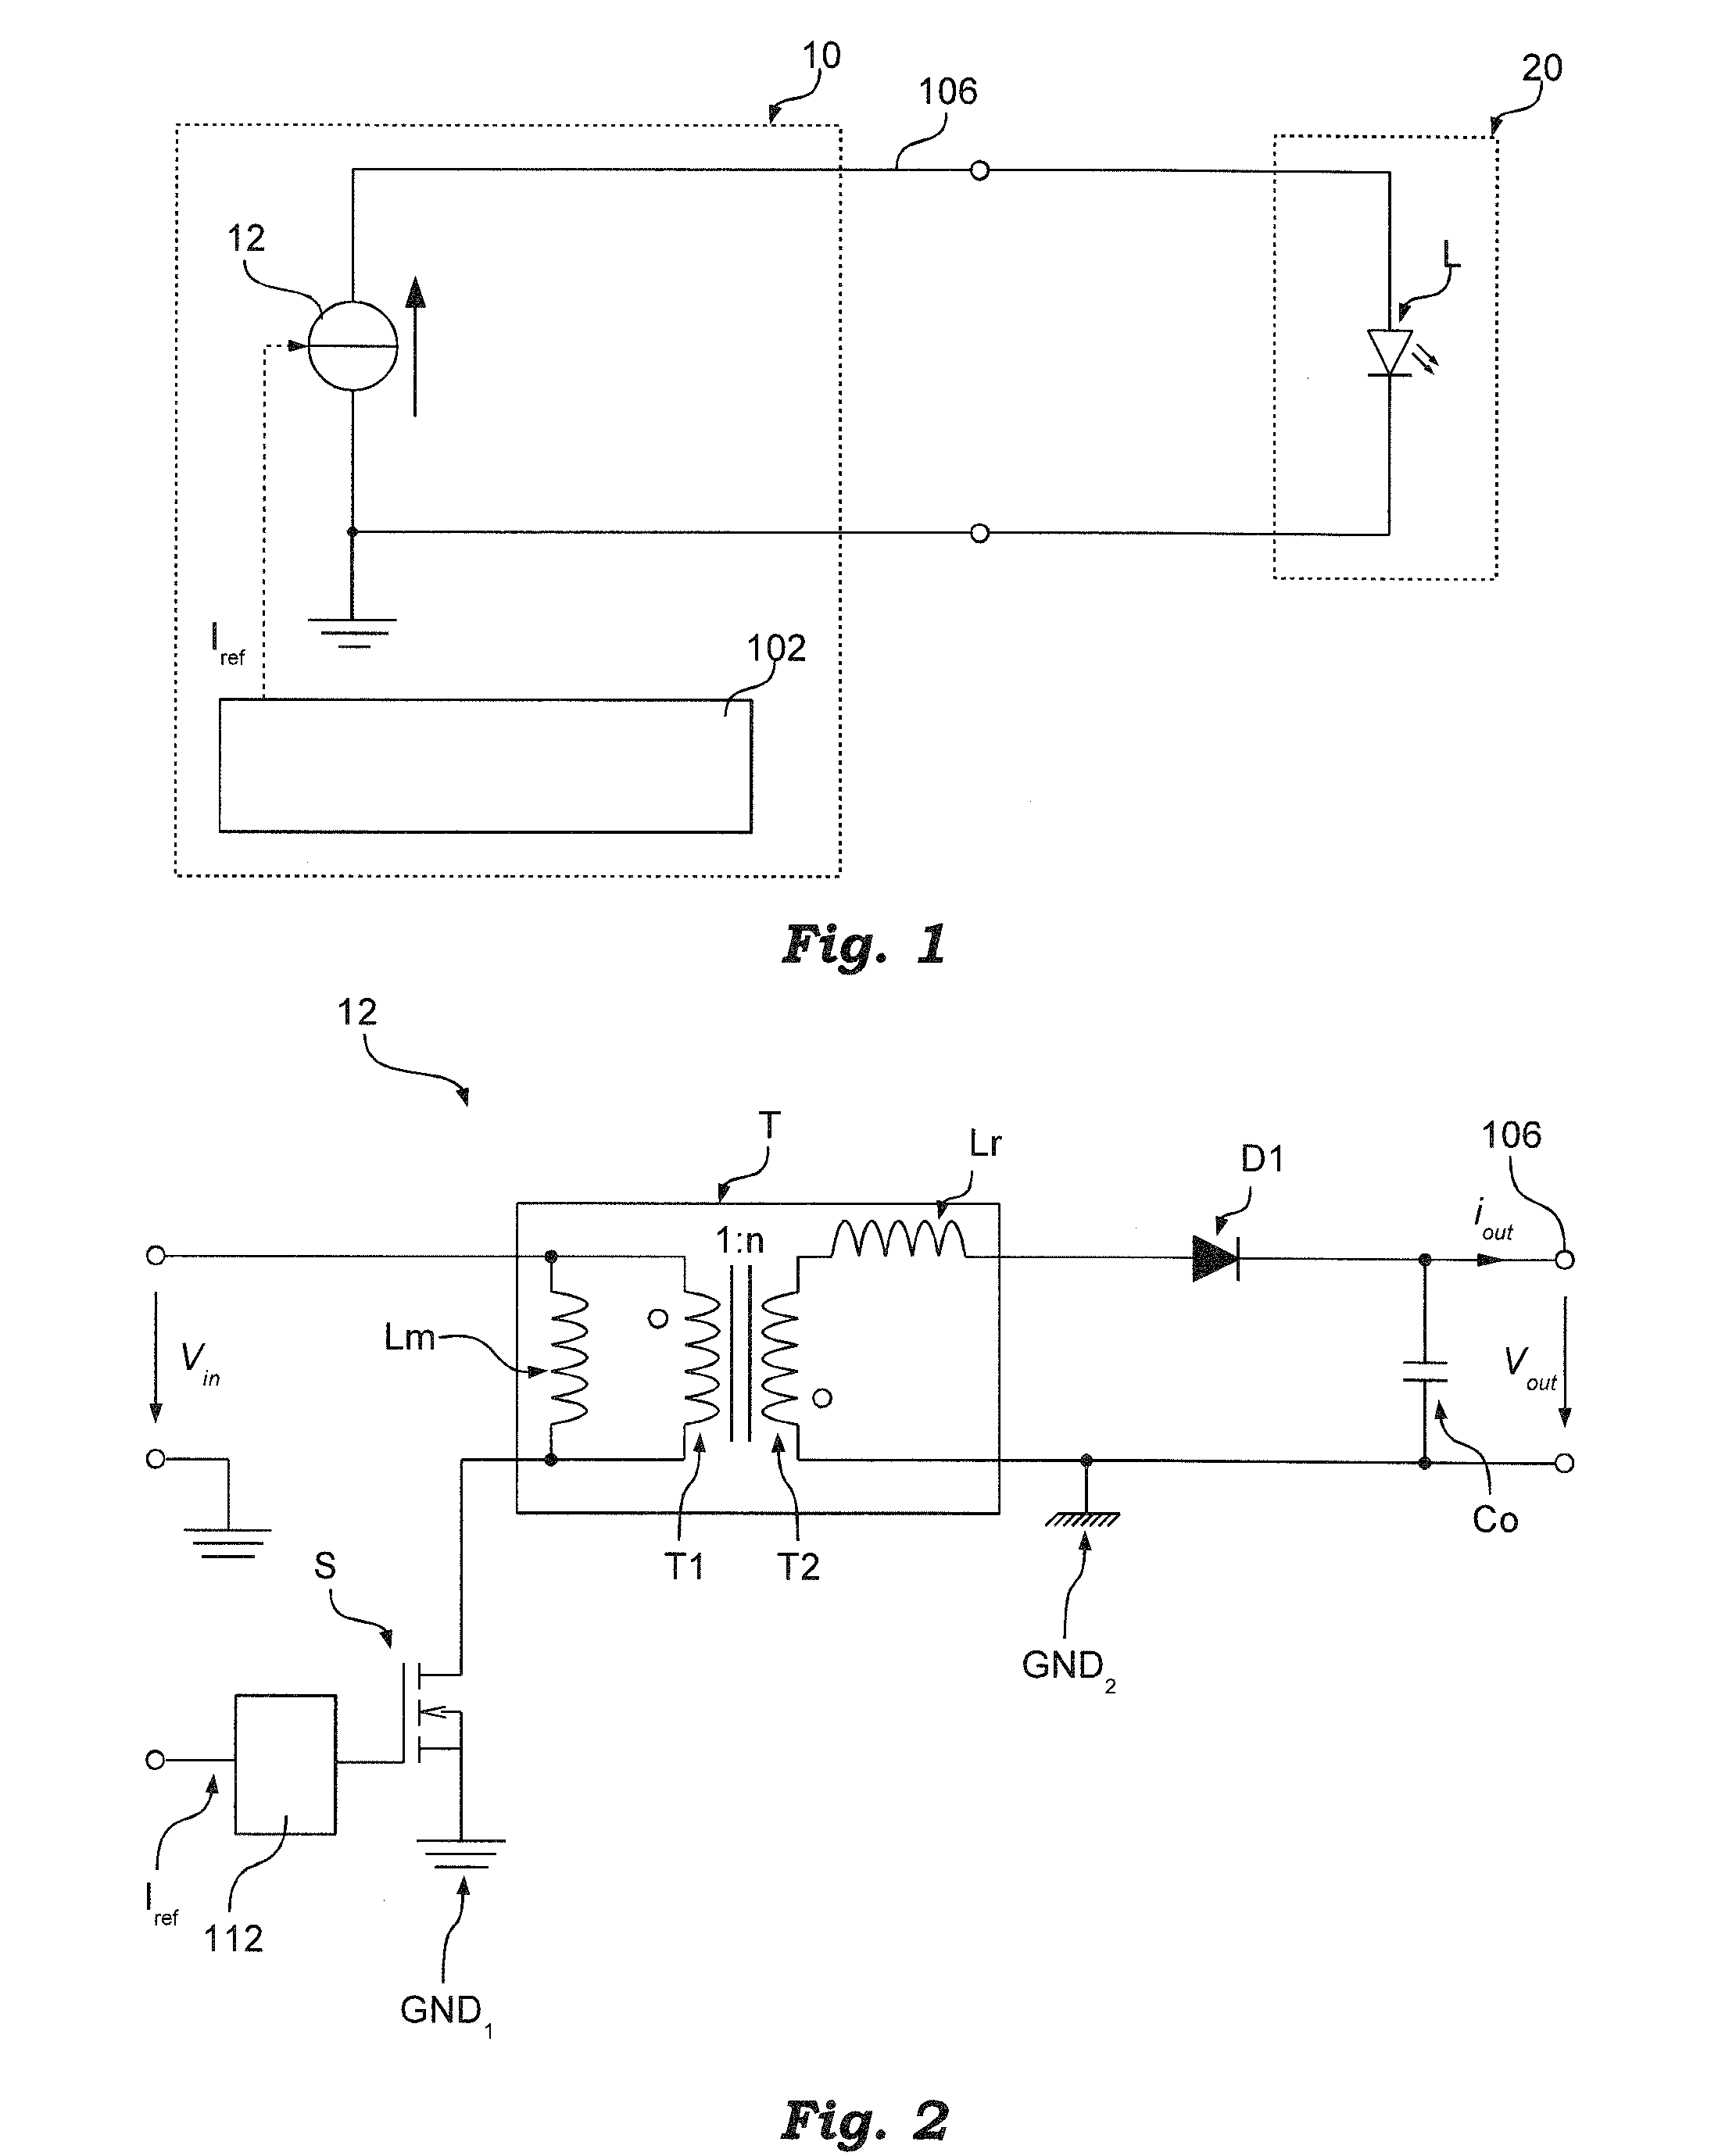 Electronic converter, and related lighting system and method of operating an electronic converter